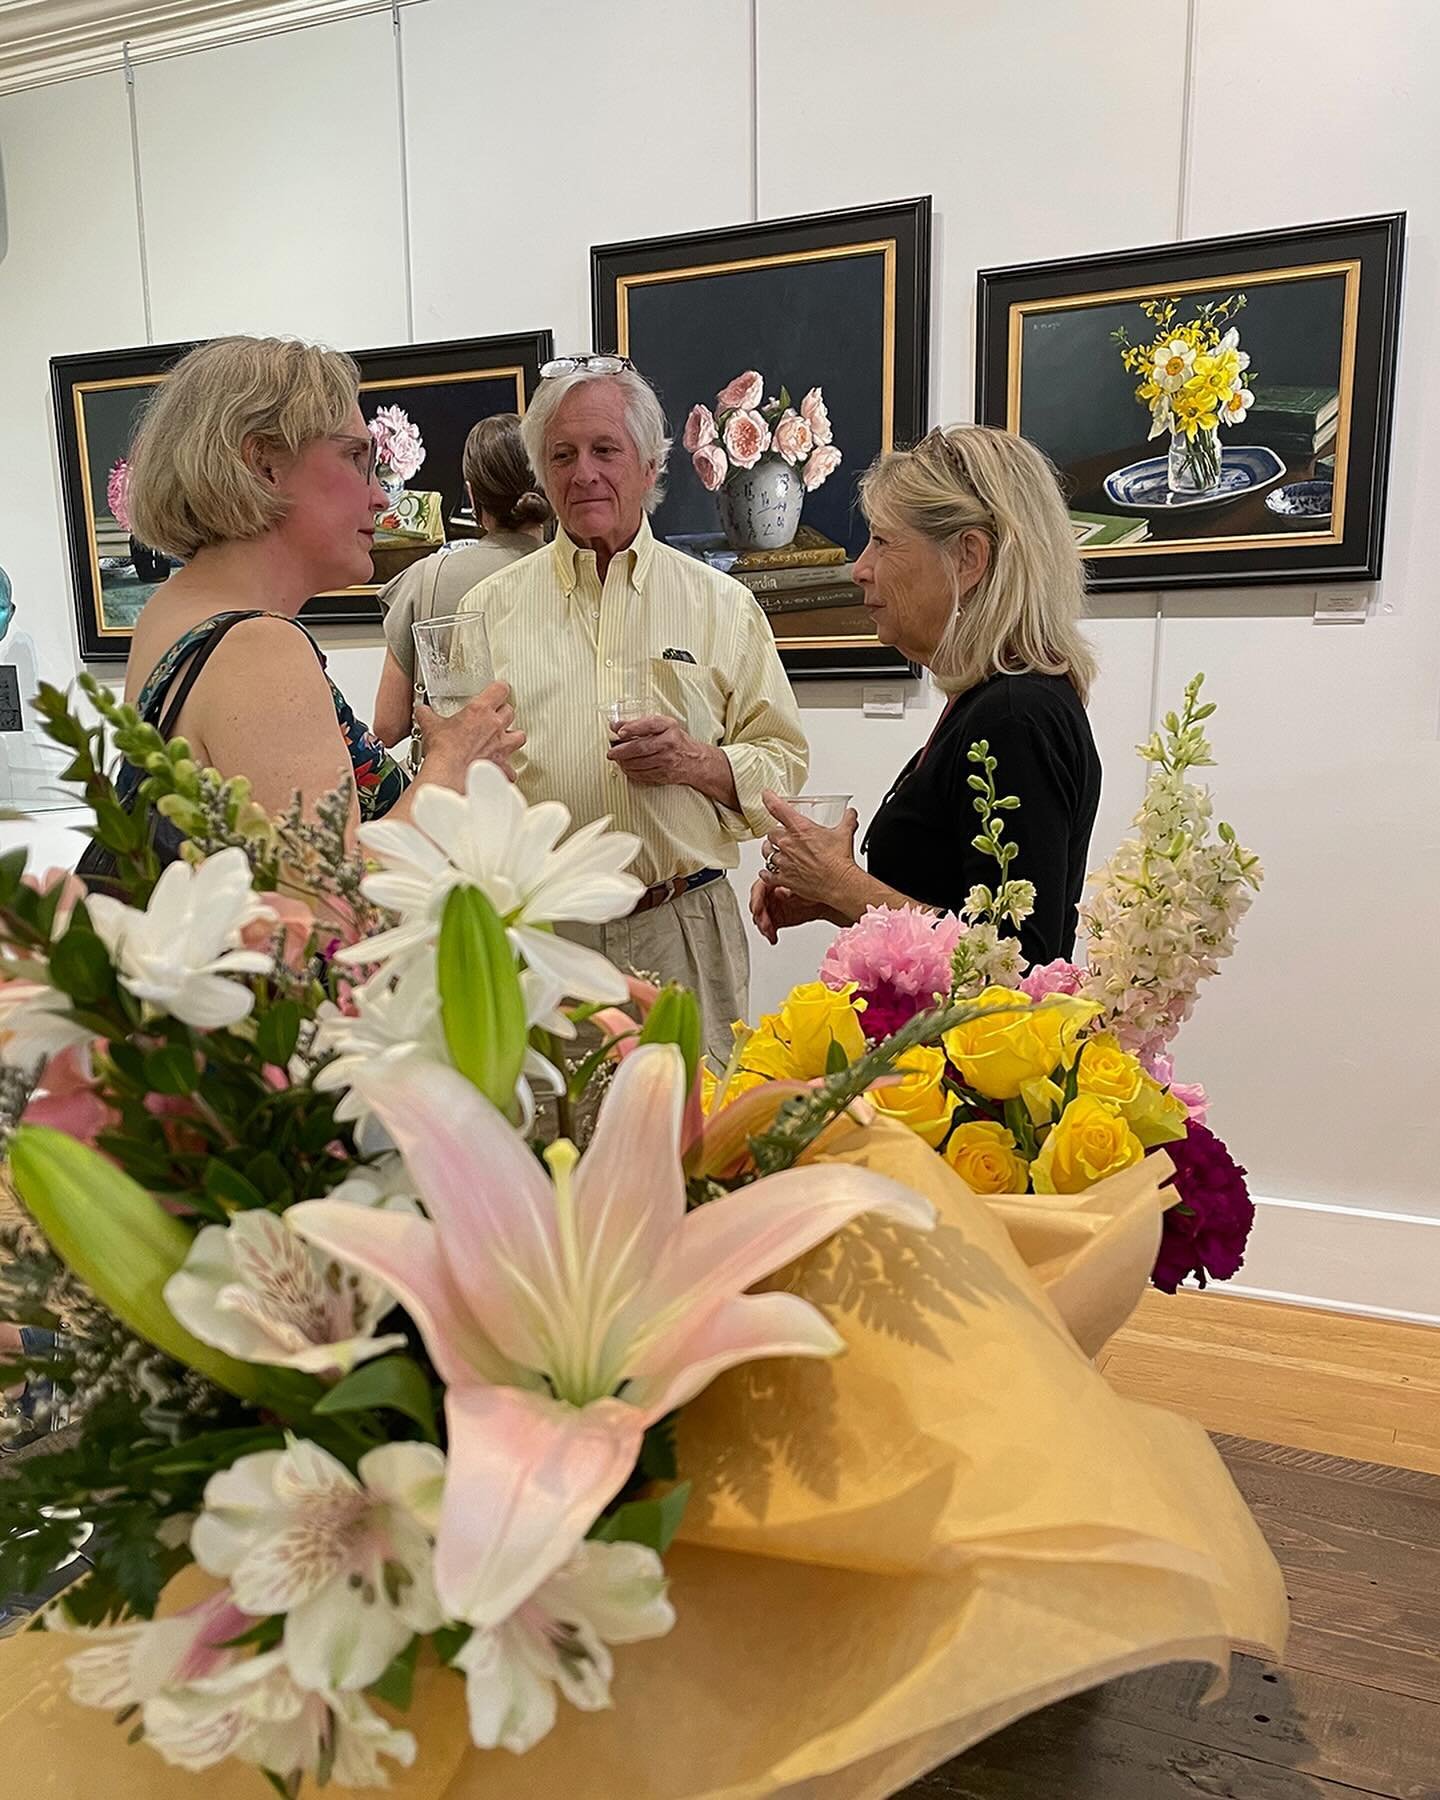 One week ago today I was in Charleston, SC! ⁠
⁠
Some scenes from the opening of MEMORIES in BLOOM at&nbsp;@principle_charleston 💓💓💓⁠
⁠
Works on view in the gallery and online via @principle_charleston website and Catalog available by emailing art@